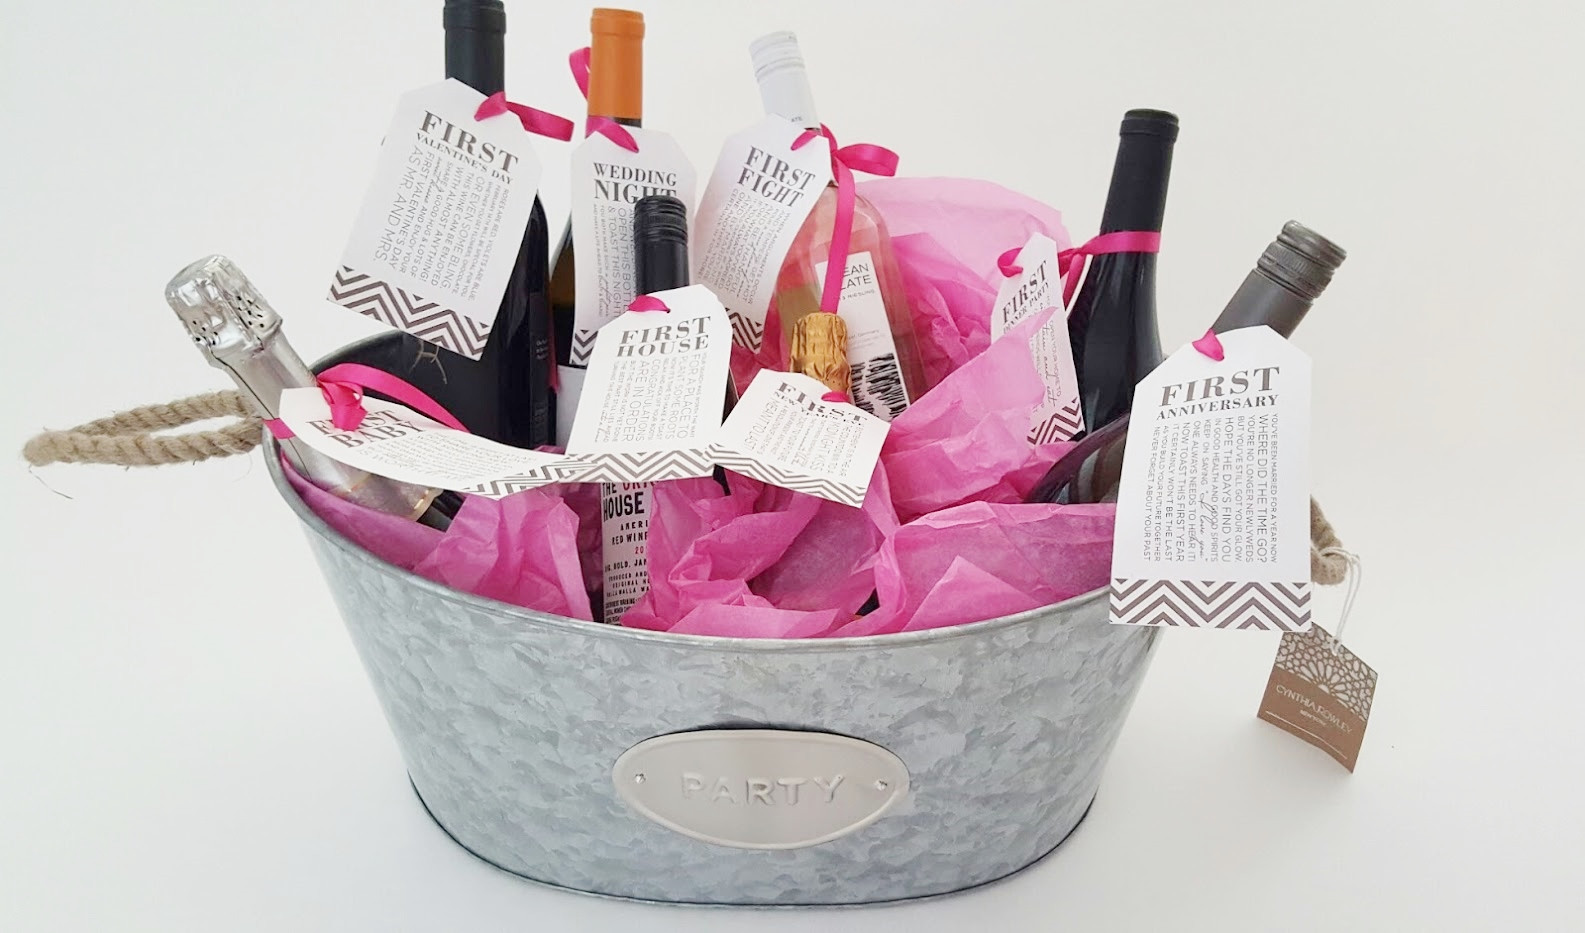 DIY Bridal Shower Gifts Ideas
 10 Most Popular Posts of 2016